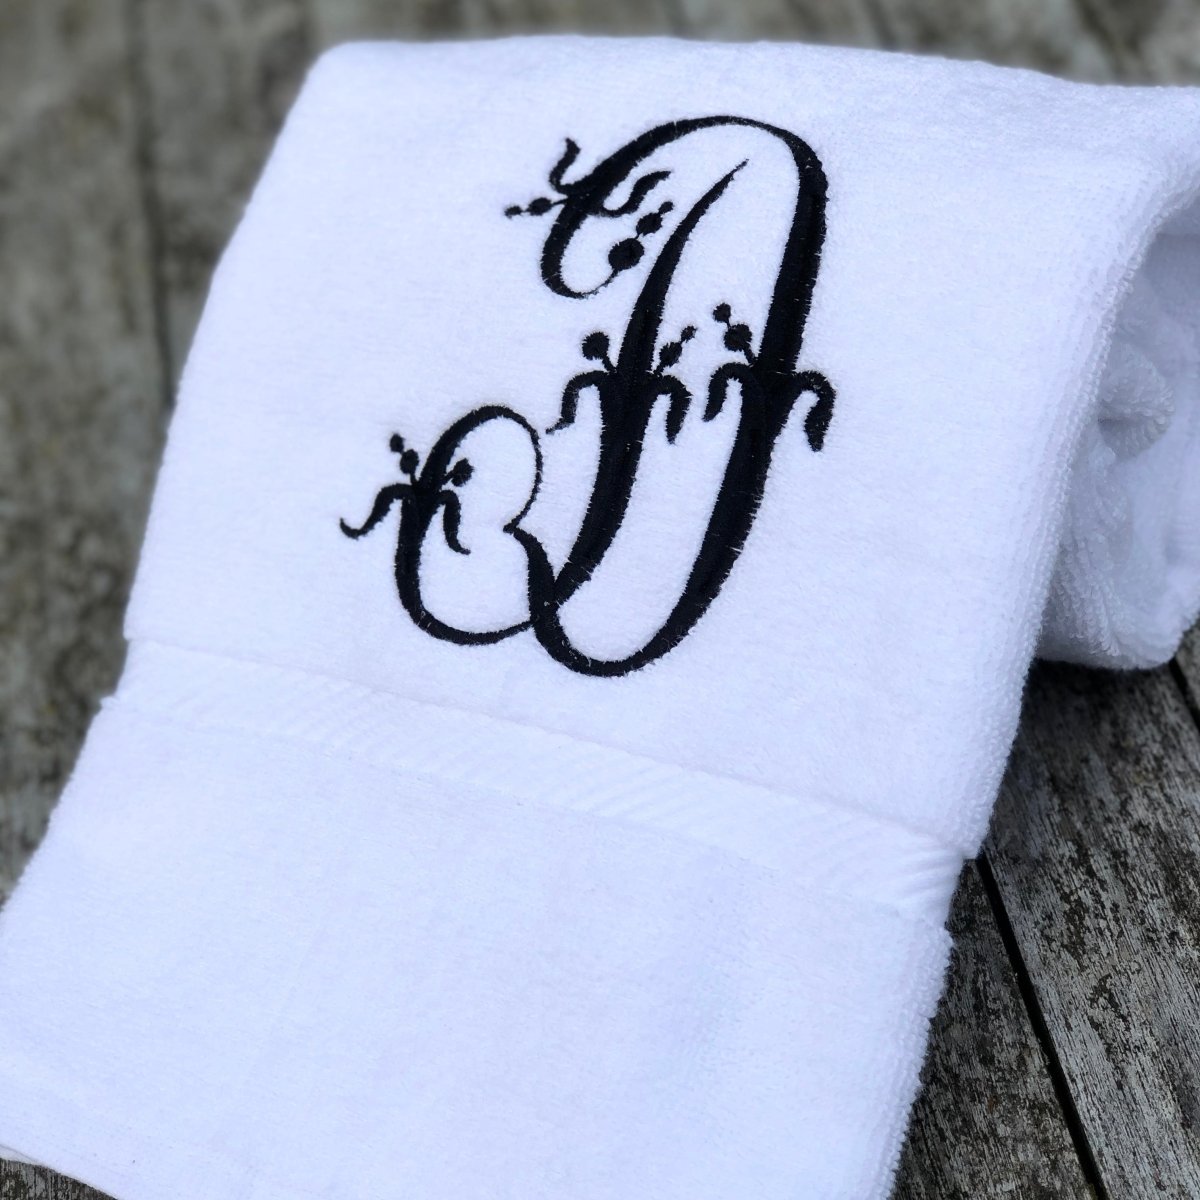 Personalized Monogrammed Hand Towels for Your Bathroom